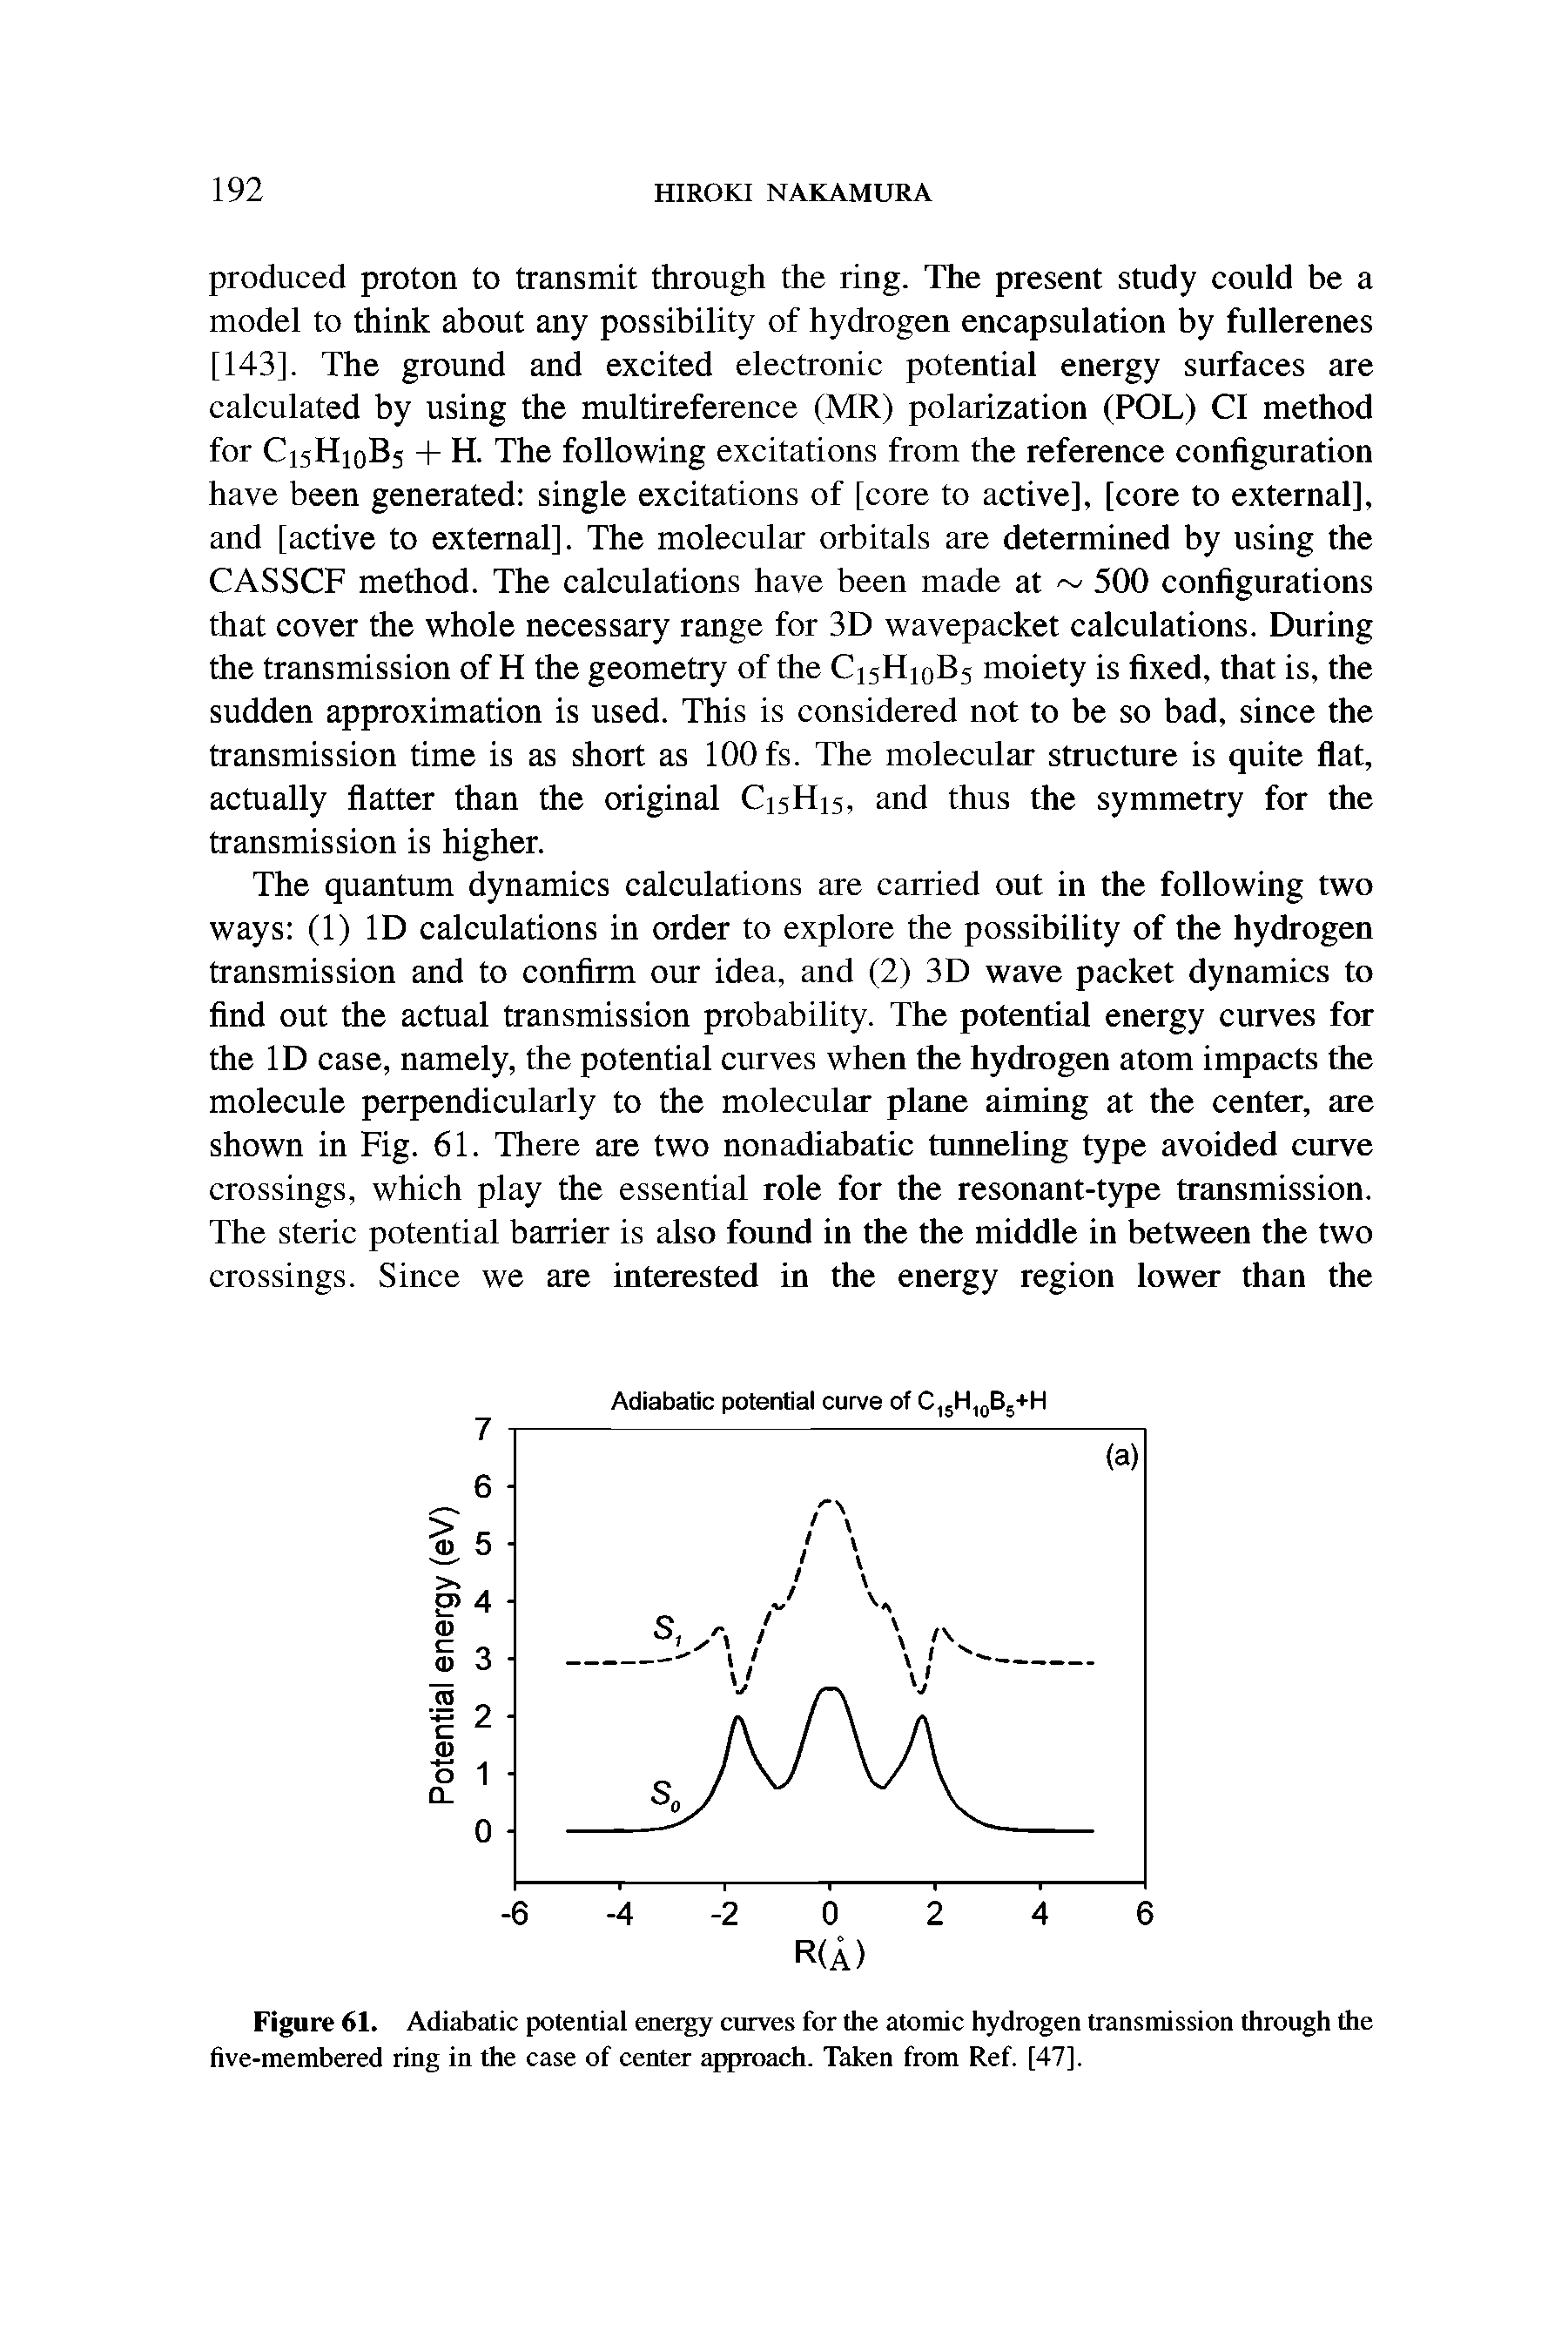 Figure 61. Adiabatic potential energy curves for the atomic hydrogen transmission through the five-membered ring in the case of center approach. Taken from Ref. [47].